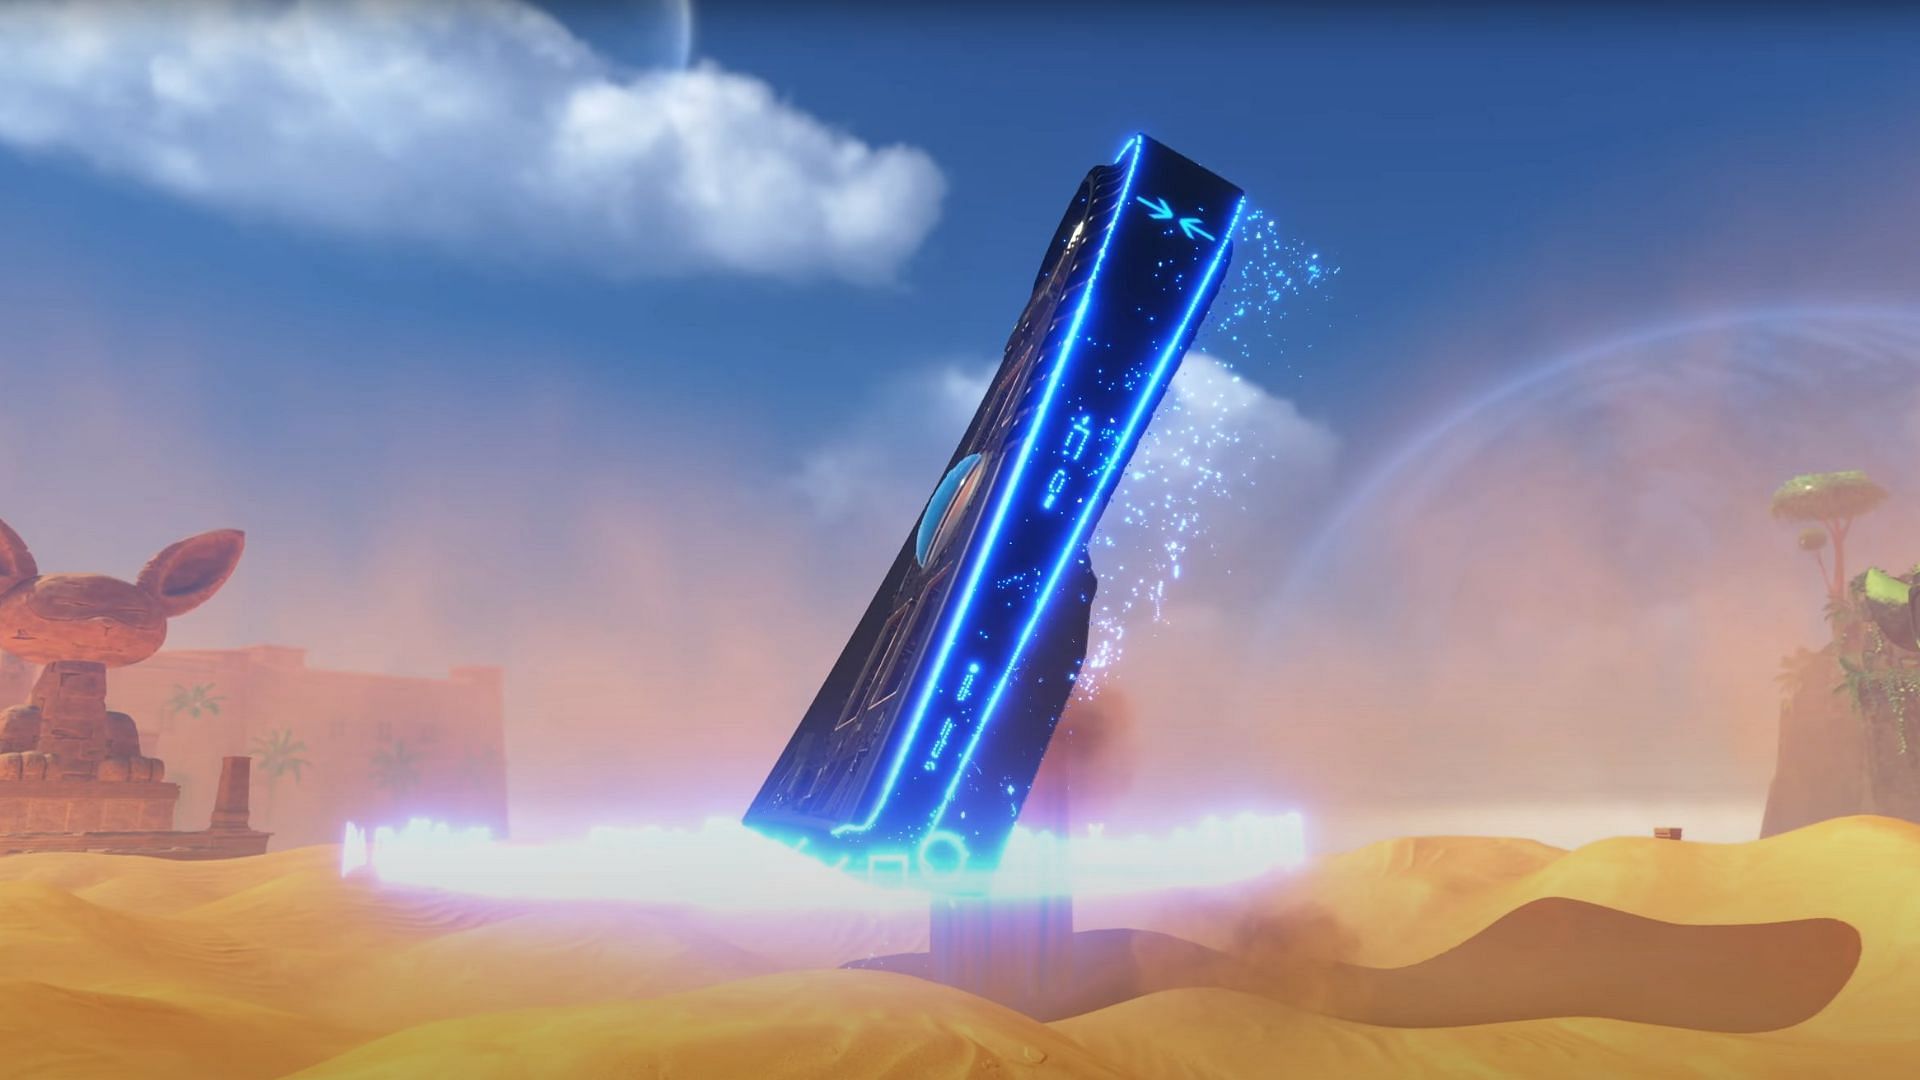 Expectations of a PS5 Pro have gone through the roof after the release of the Astro Bot trailer (Image via PlayStation)